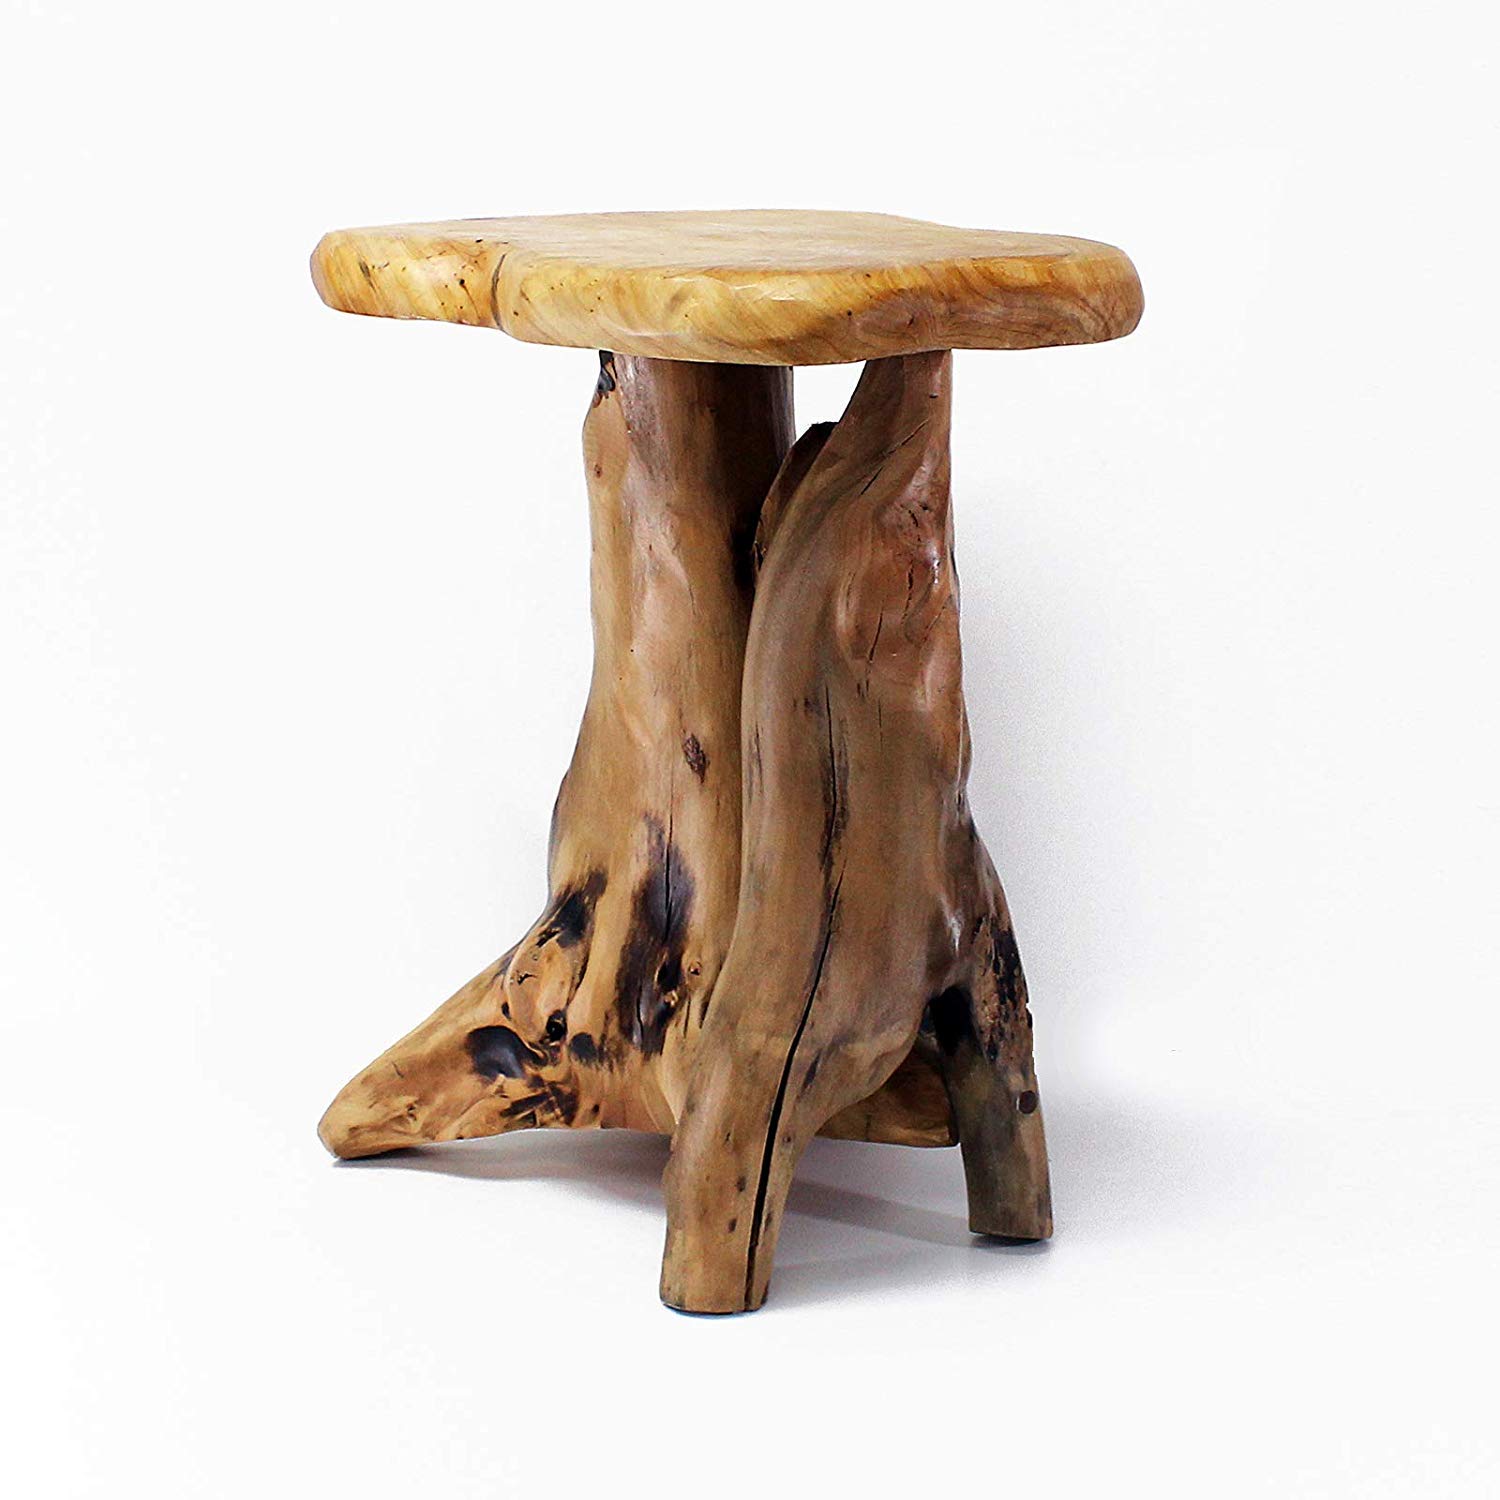 welland cedar root wood log side table end round accent with screw legs rustic primitive natural live edge kitchen dining french style small sofa edmonton modular sofas for spaces